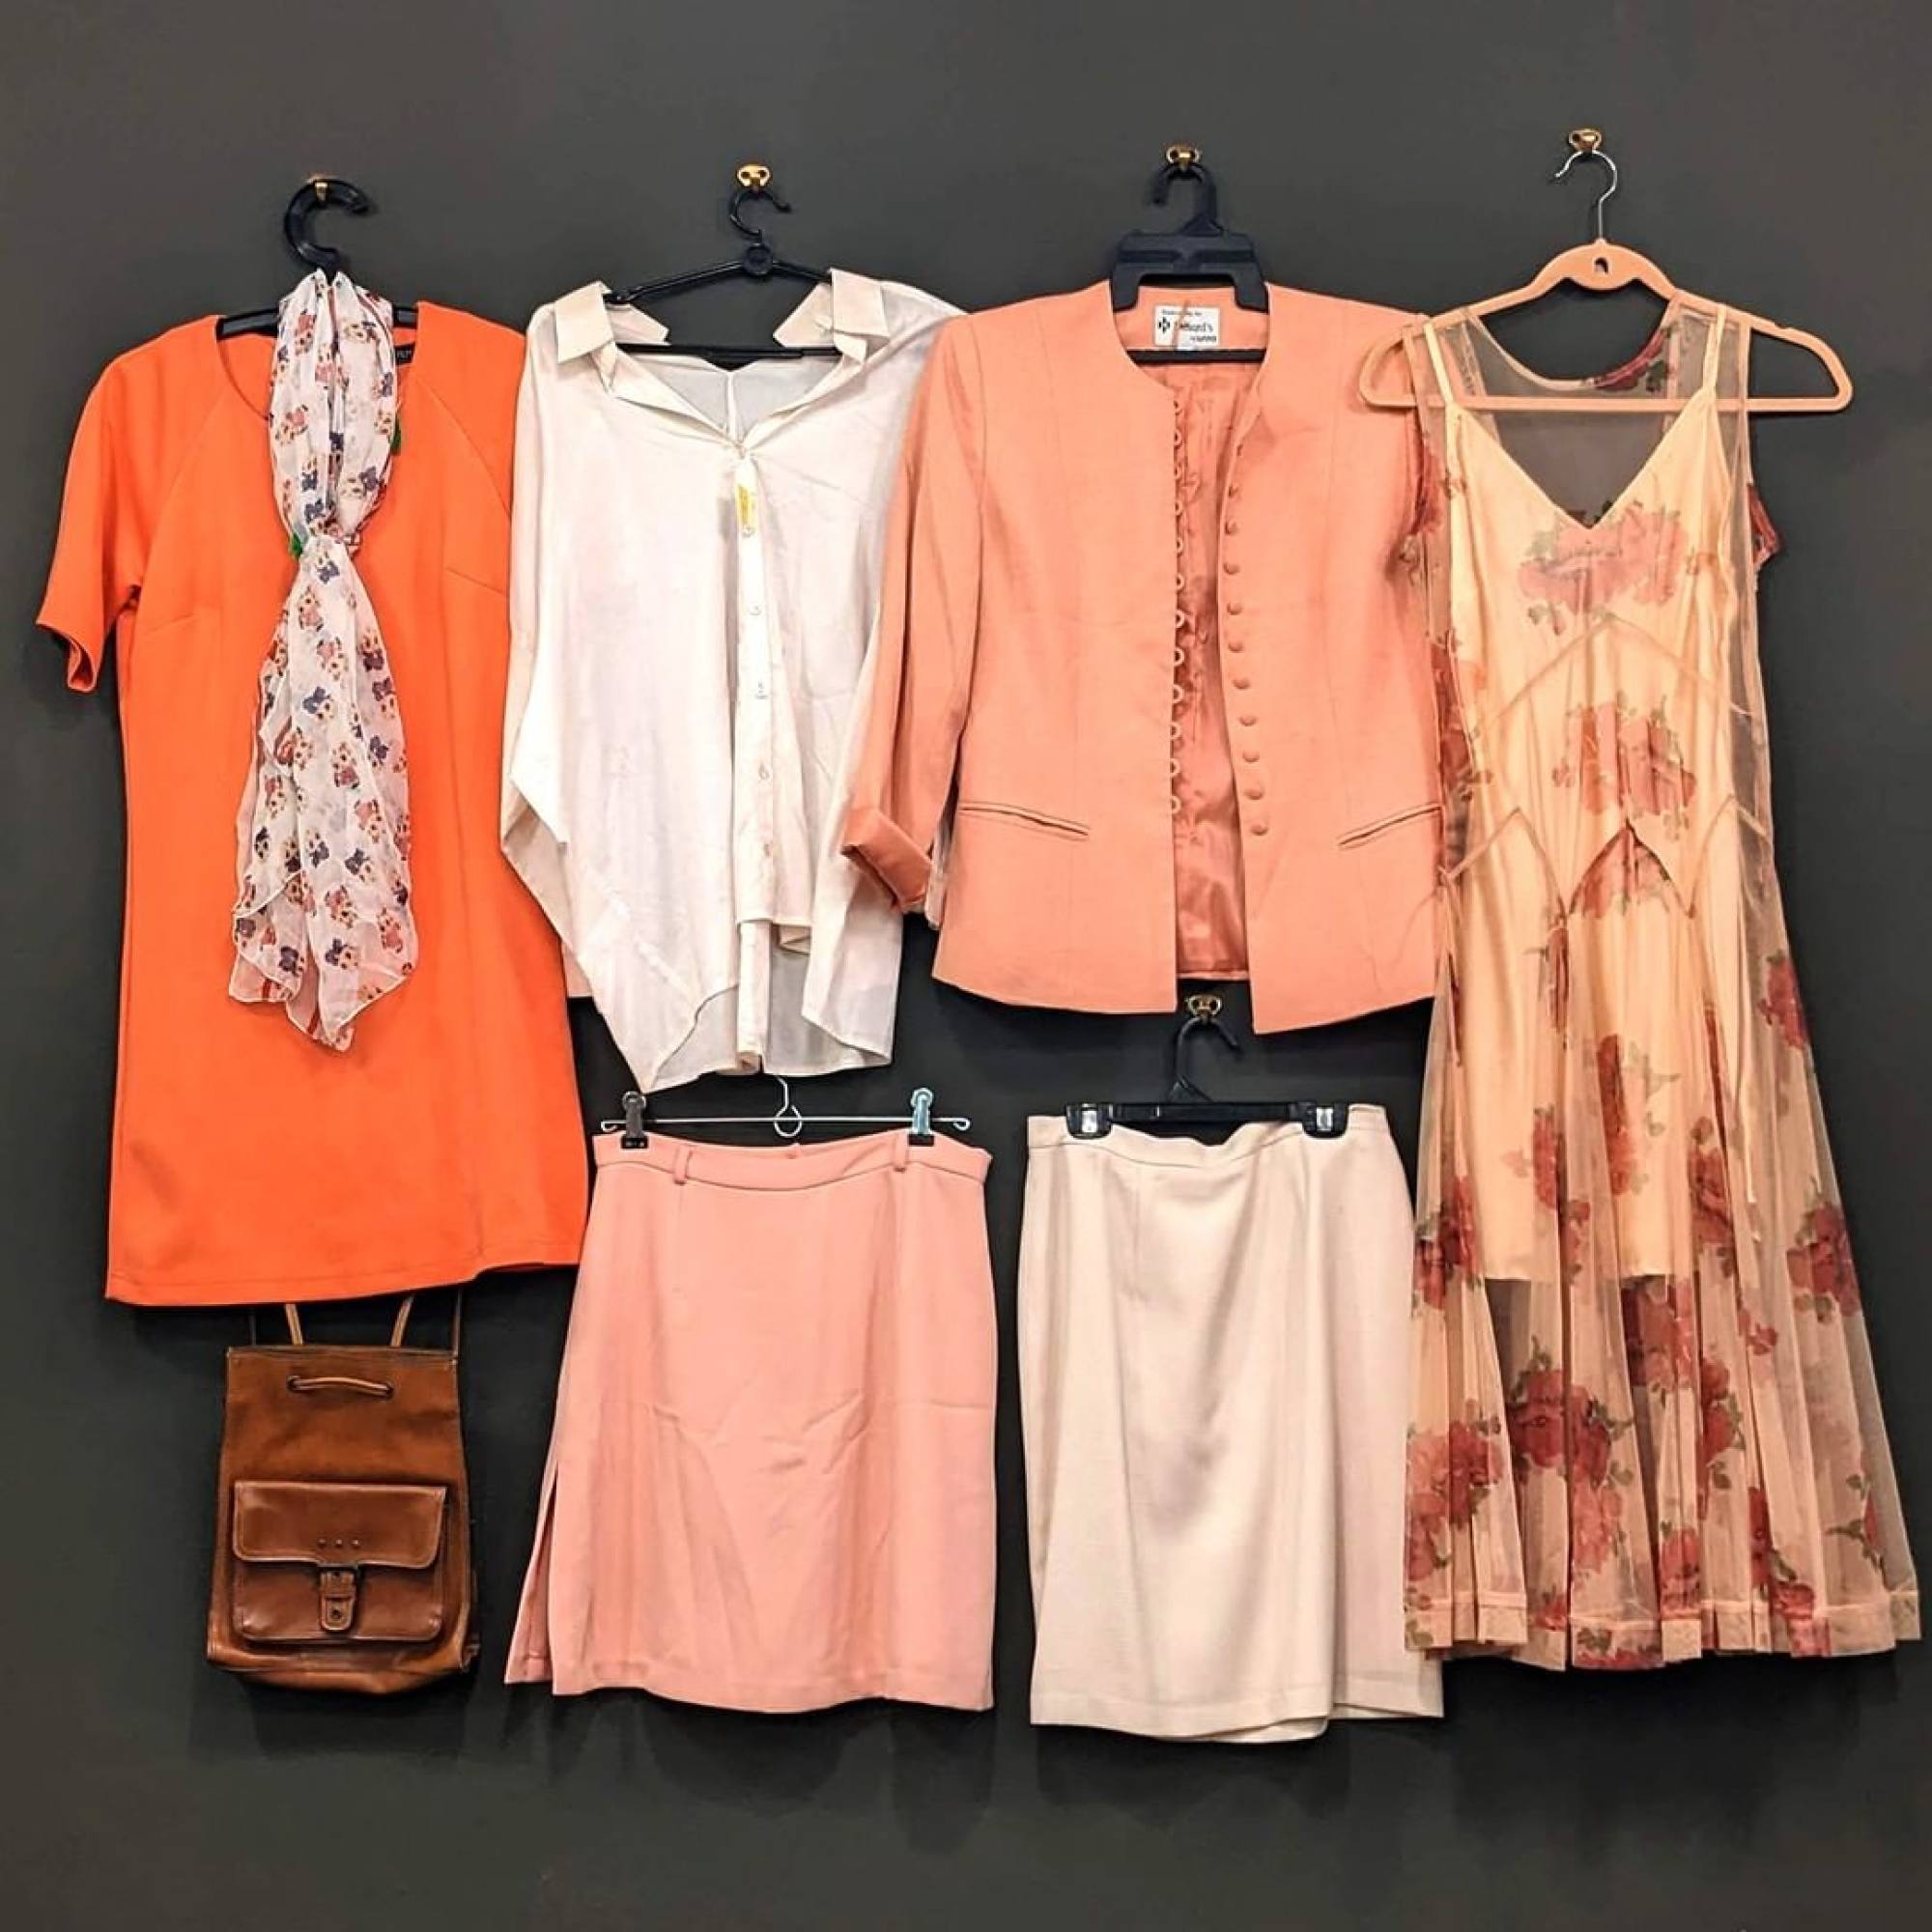 10 thrift stores in Singapore selling the chicest fashion items